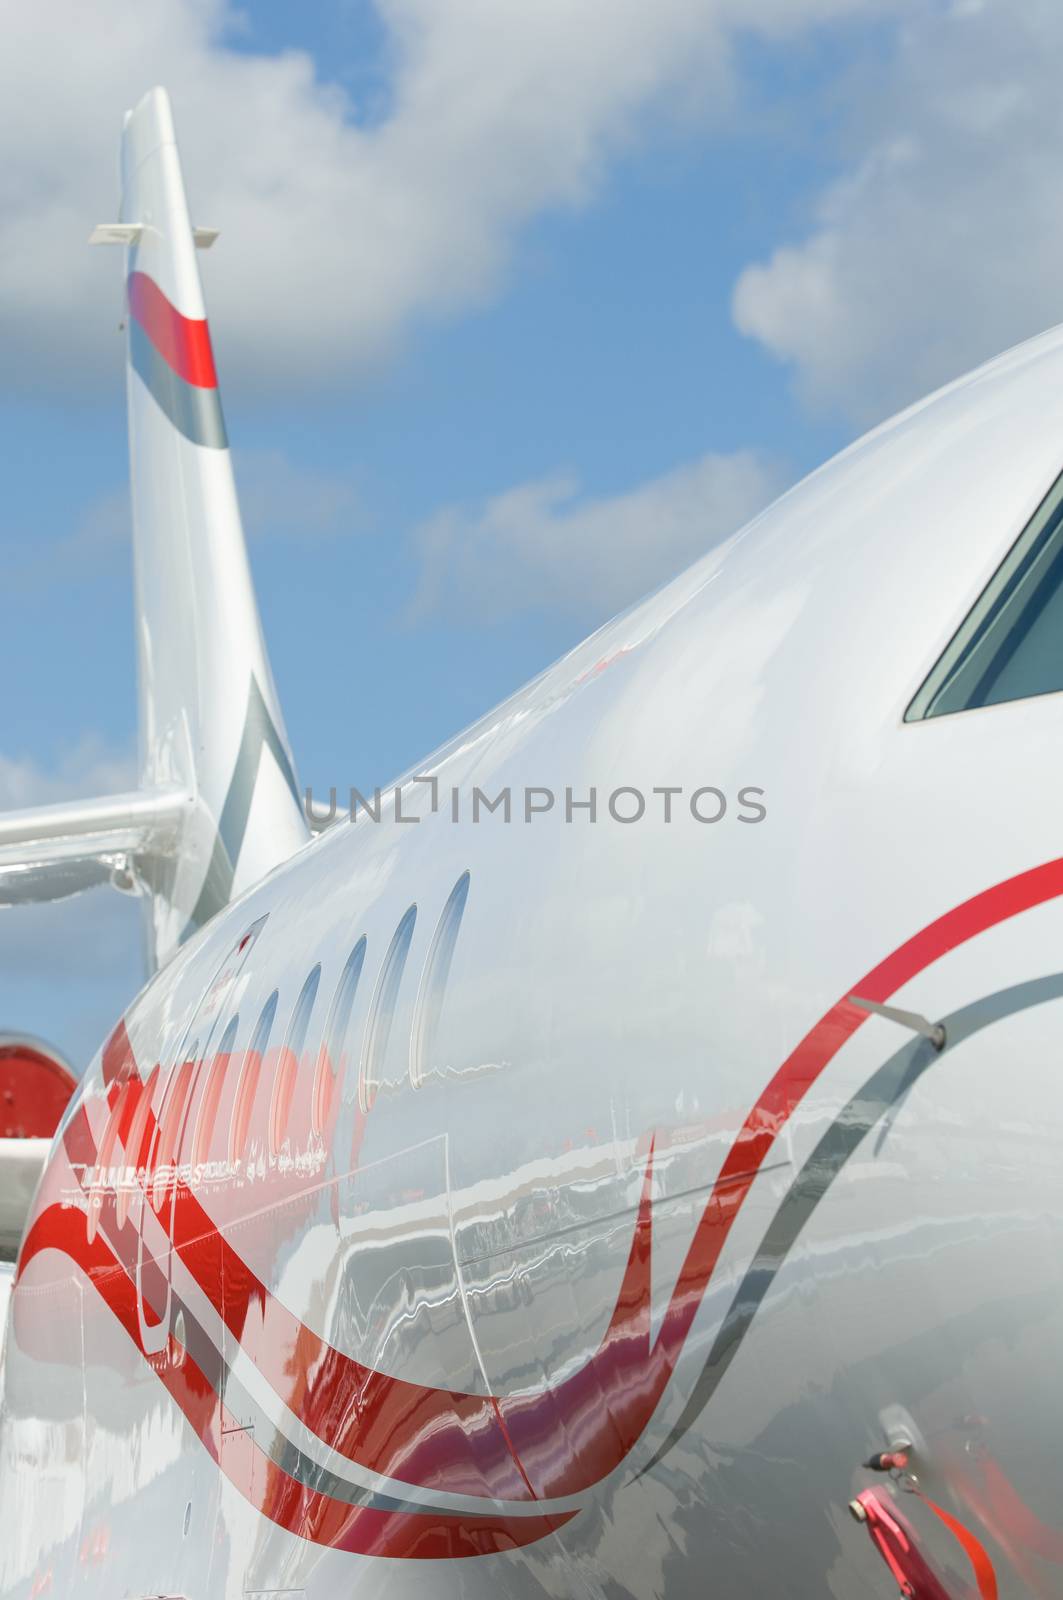 Detail of white and red corporate jet airplane